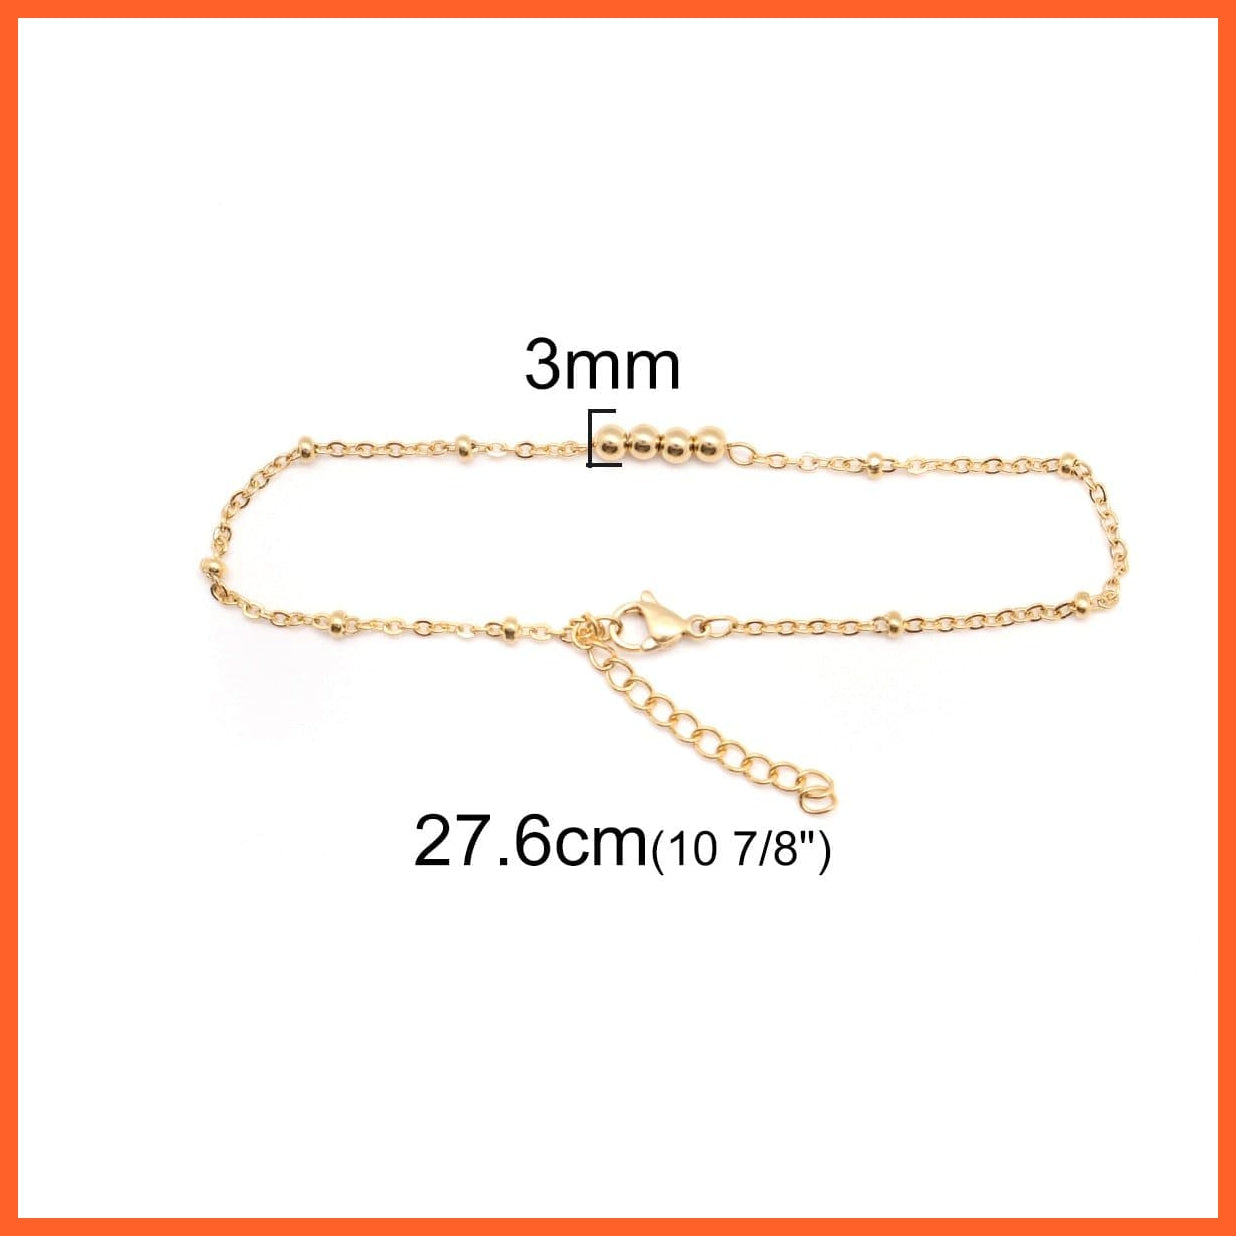 Heart Anklet For Women | Summer Beach Jewelry | whatagift.com.au.